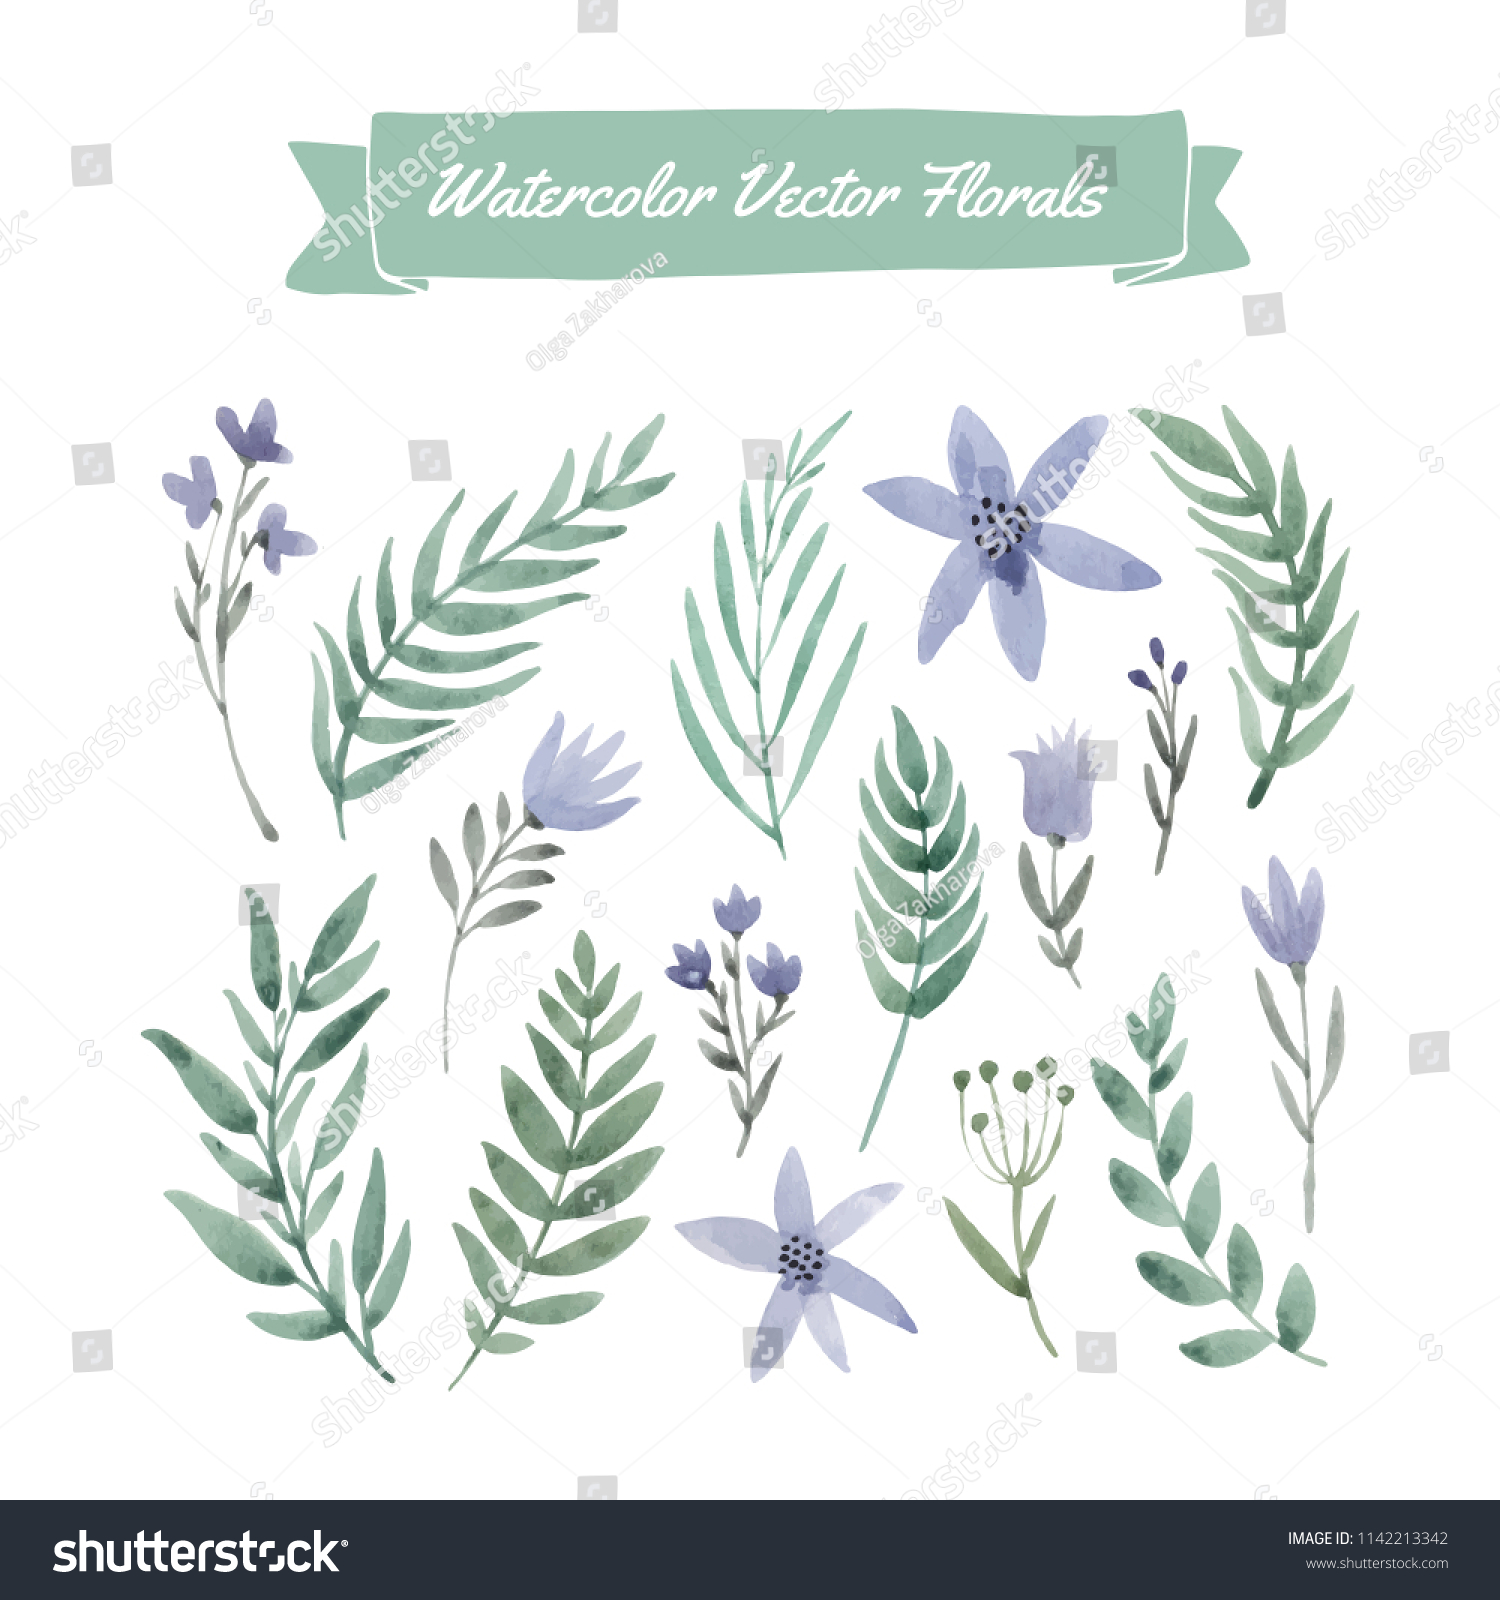 Set of handpainted watercolor vector flowers and leaves.  #1142213342